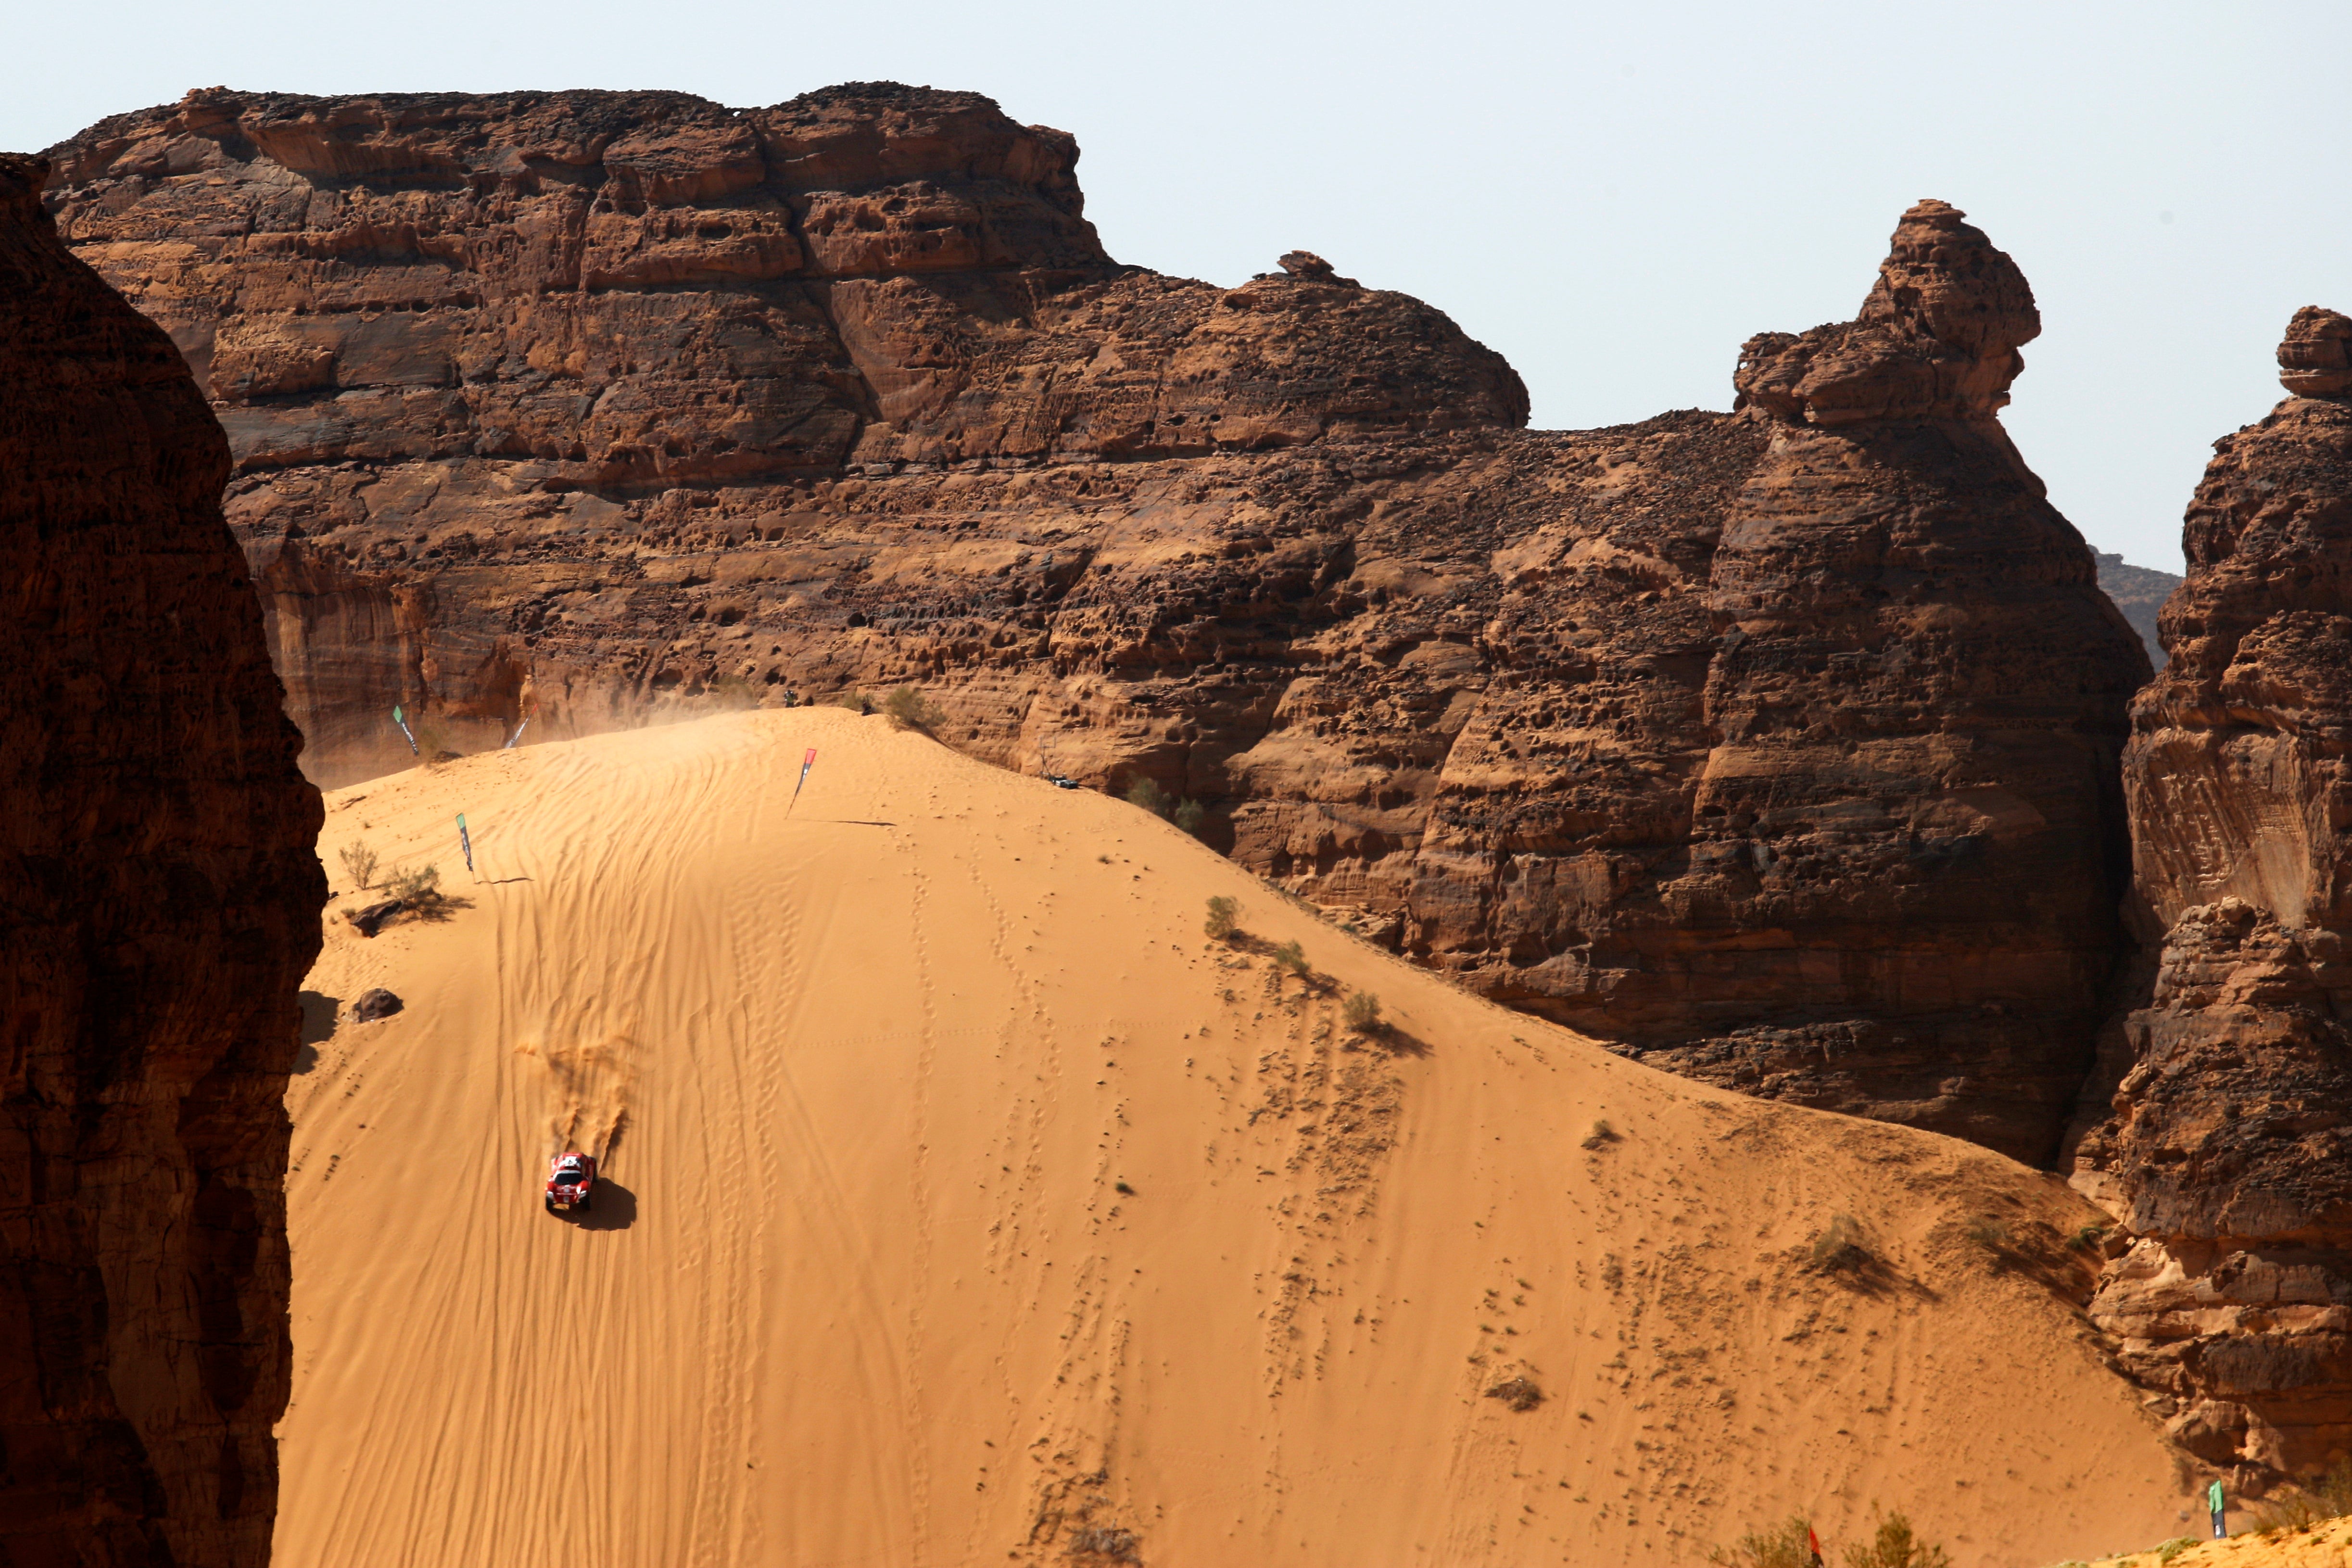 The drop which greets drivers during the Desert X Prix in AlUla